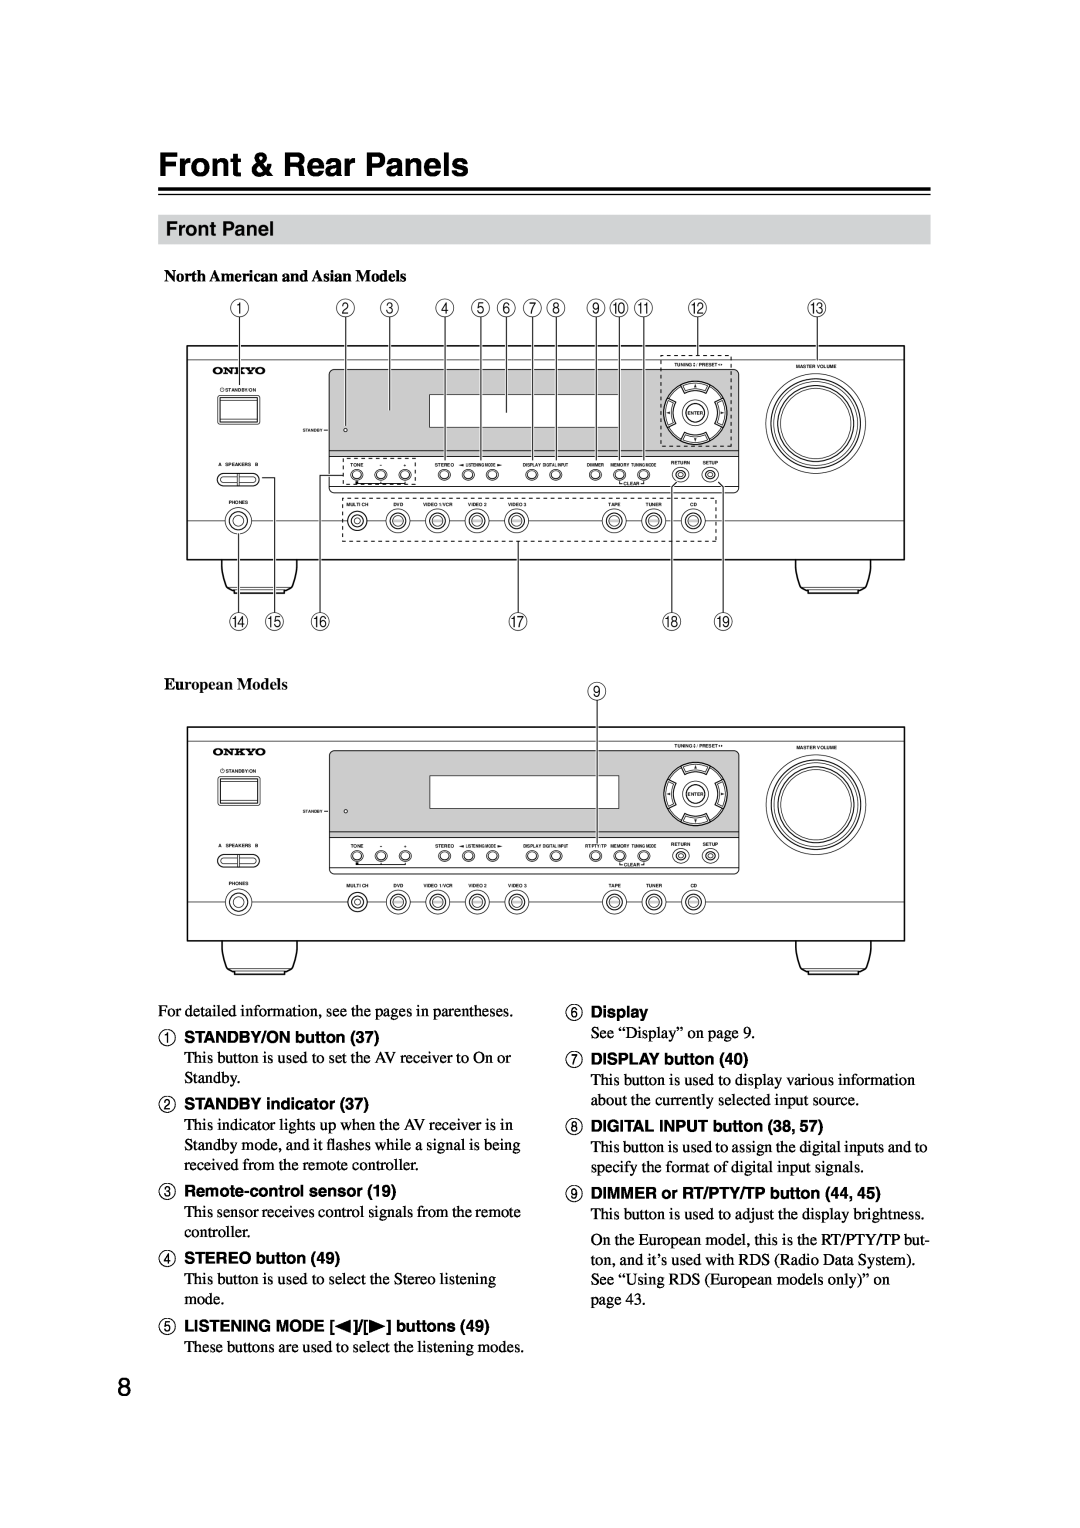 Onkyo HT-S3105 Front & Rear Panels, Front Panel, 4 5 6 78 9JK, N O P, North American and Asian Models, European Models 